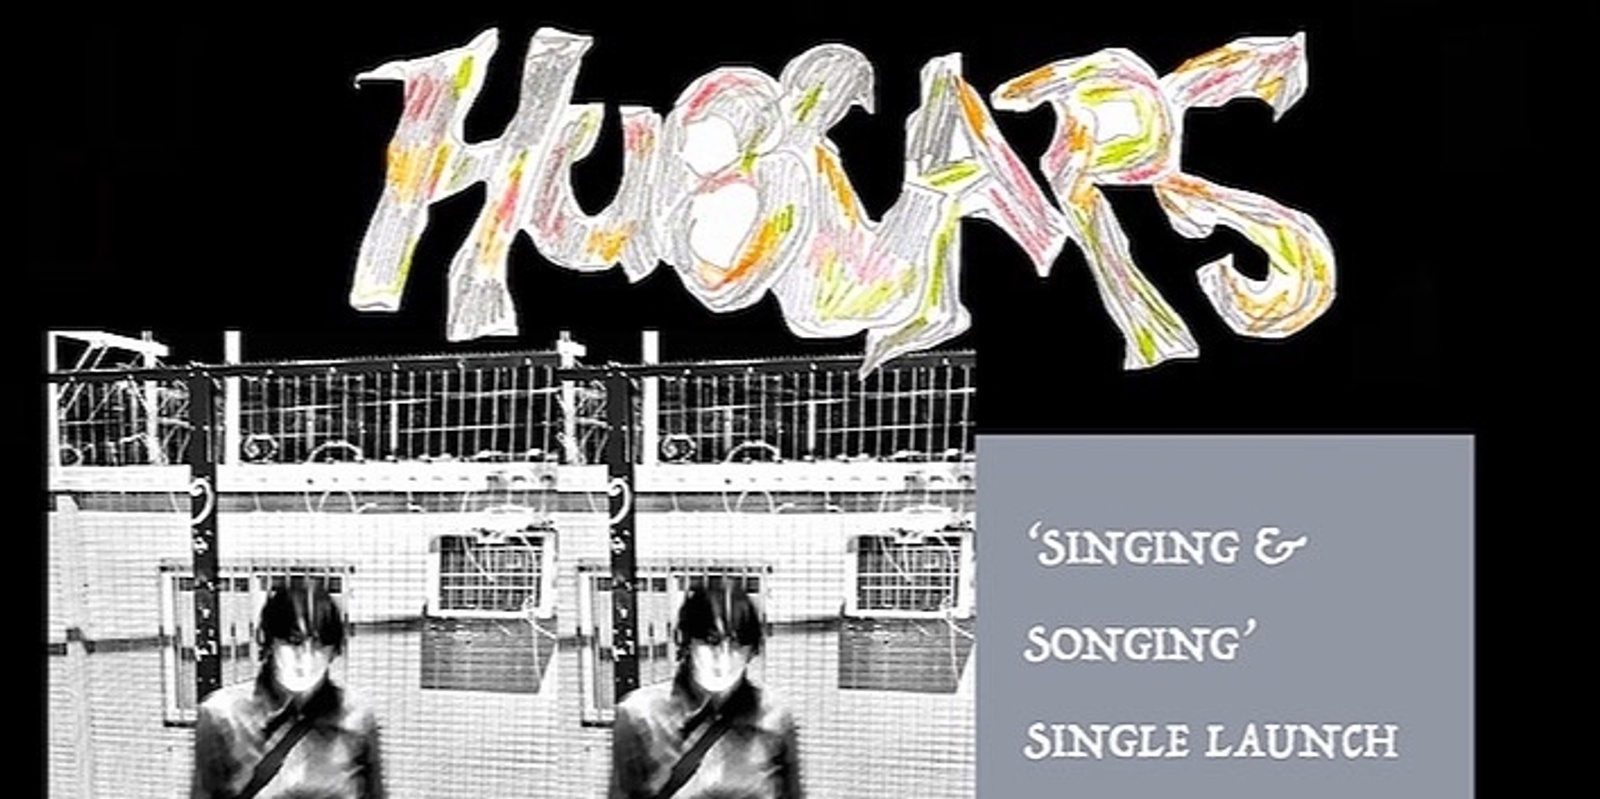 Banner image for Hubcaps ‘Singing & Songing’ Single Launch with Lottie World